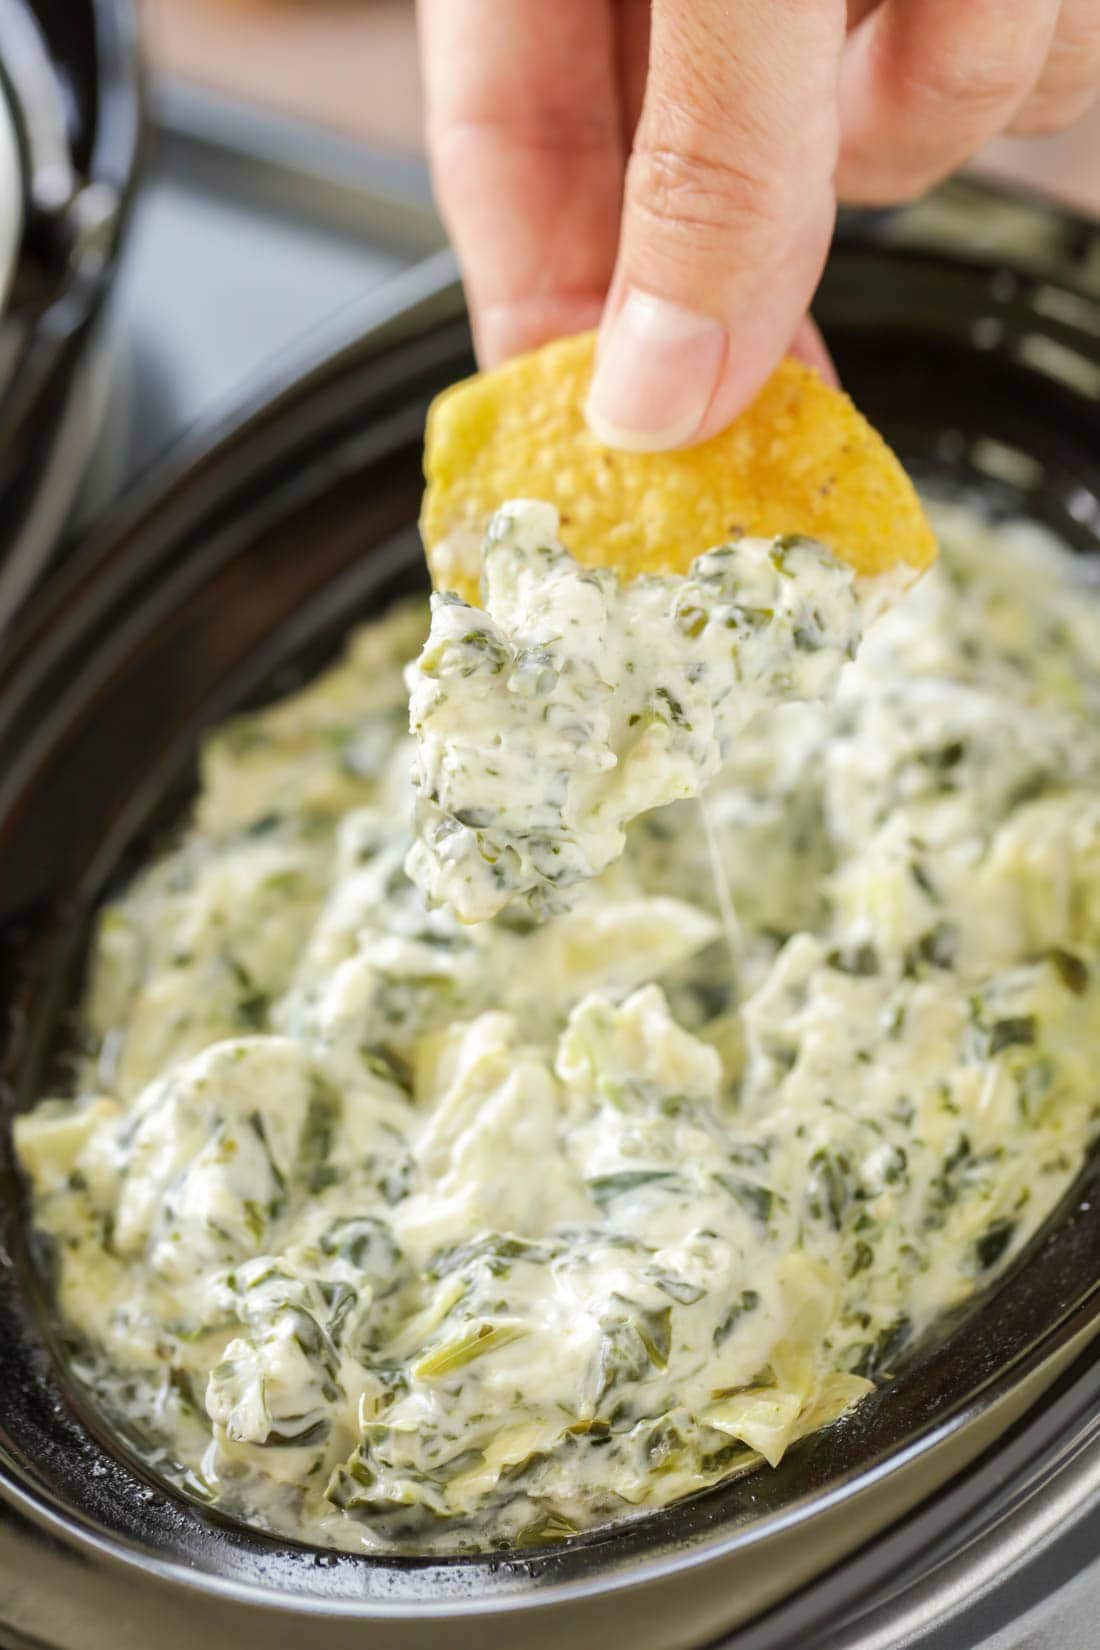 Spinach and artichoke dip in the crockpot